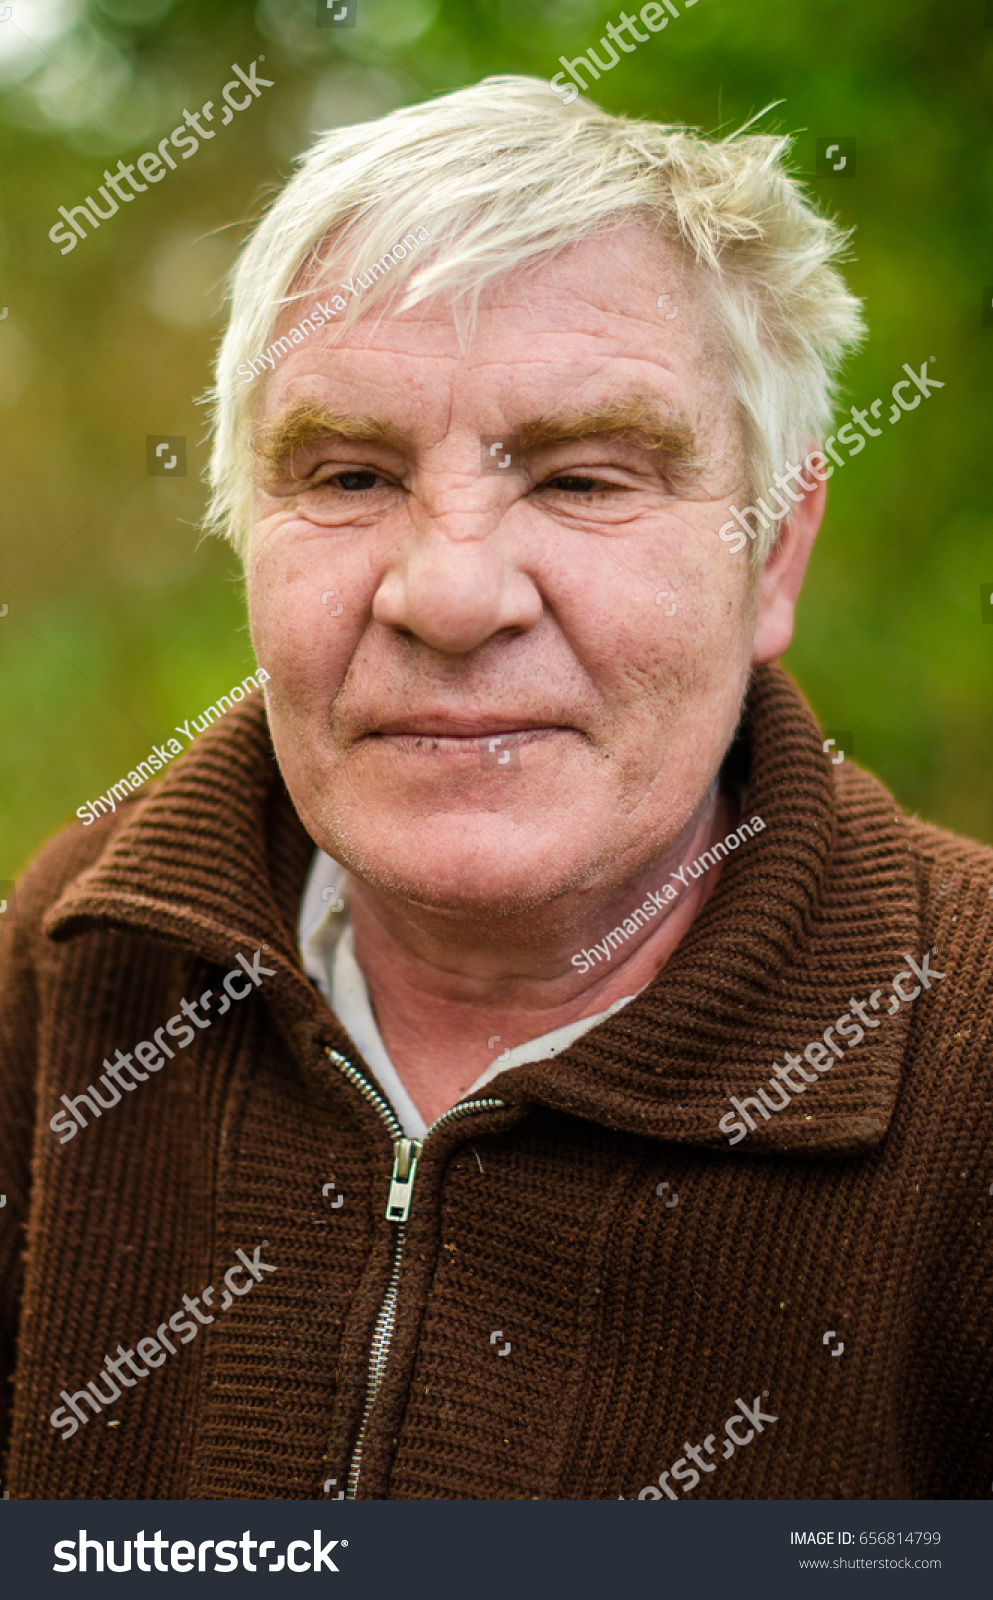 Dangers Alcohol Old Man Chubby Face image